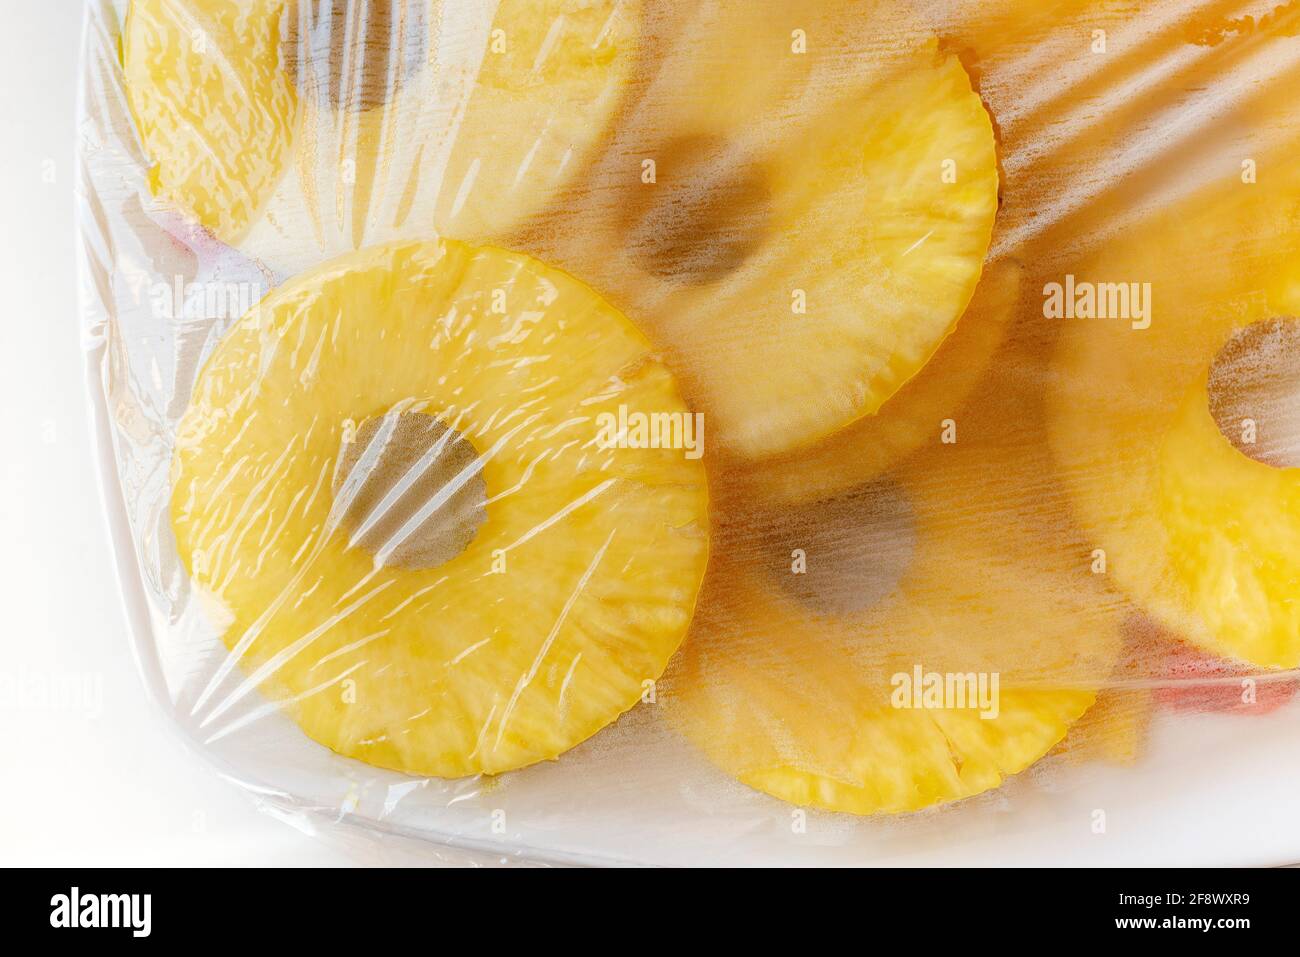 Slices of Fresh Pineapple Ananas Covered With Plastic Wrap Stock Photo